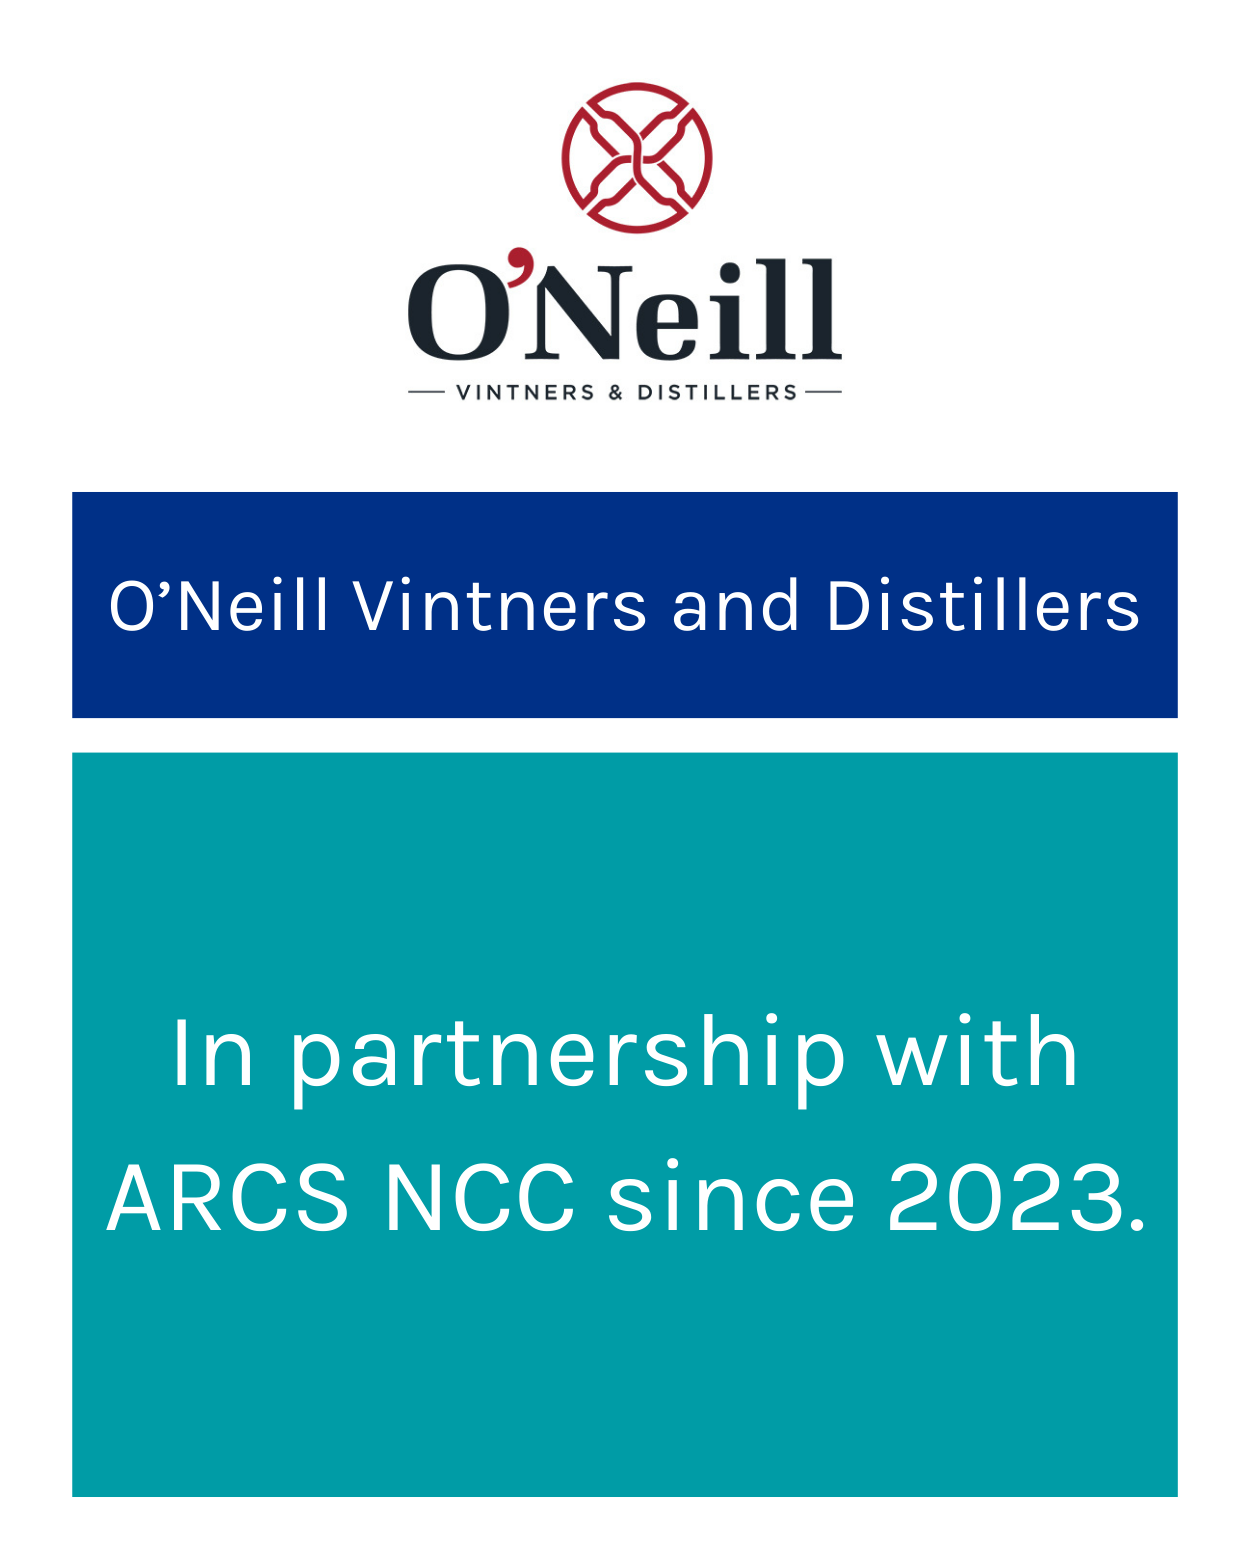 ONeill Vinters and Distillers